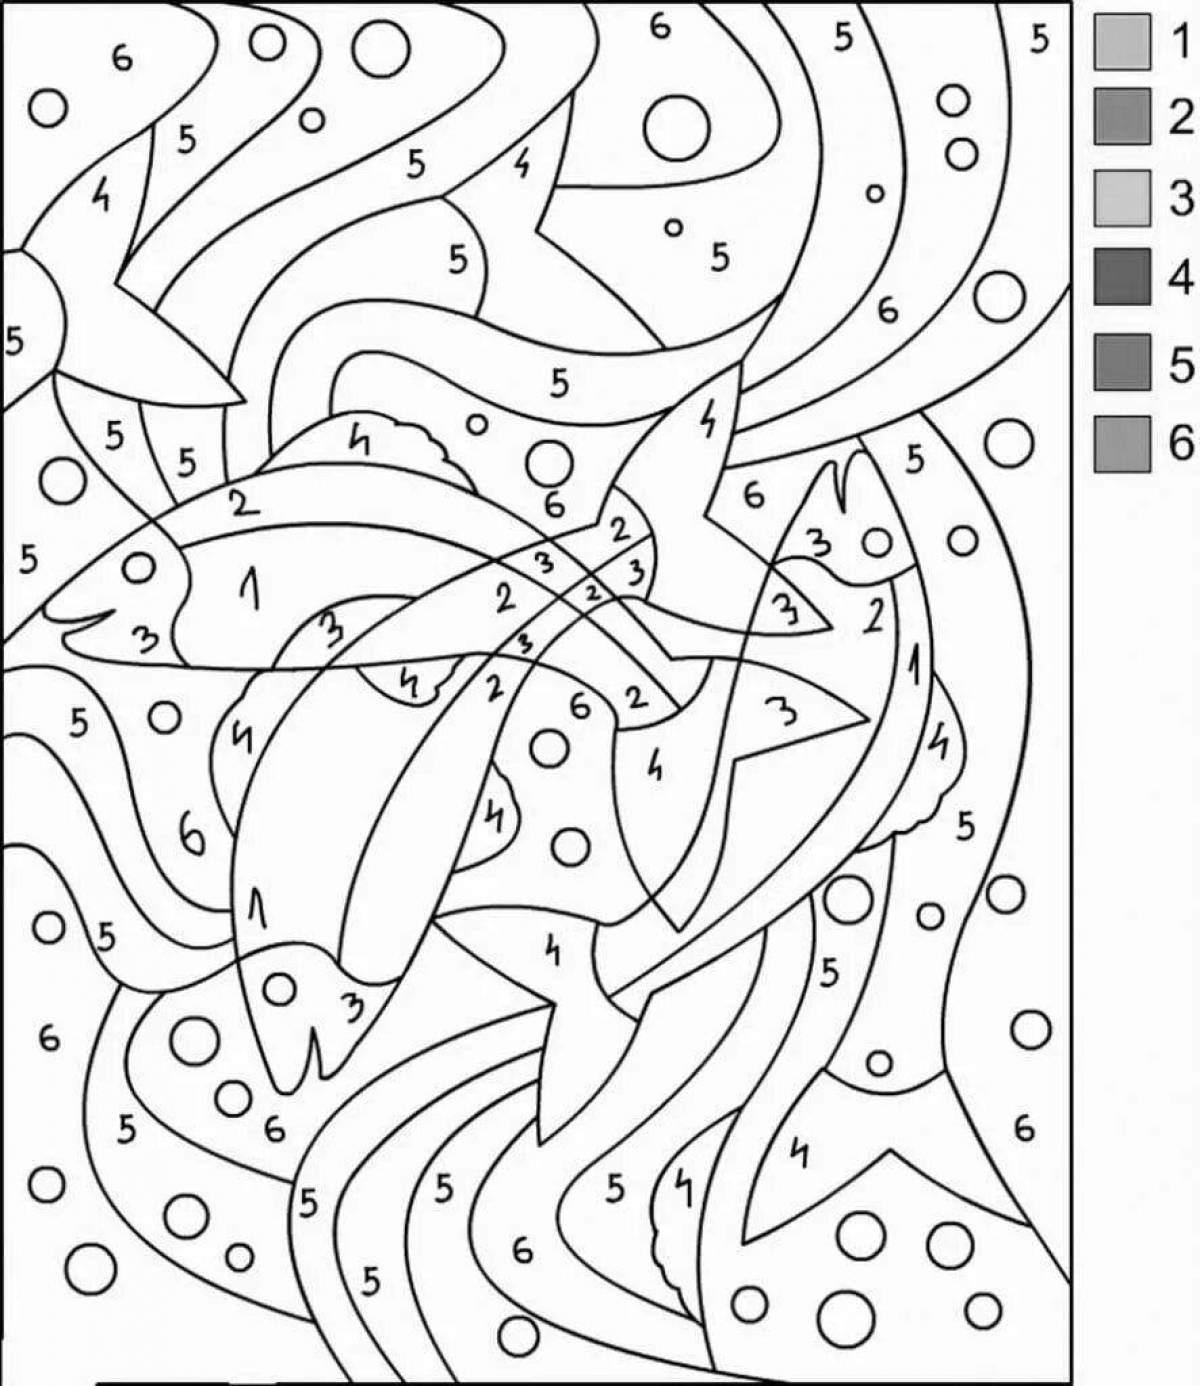 Colorful fantasy create by numbers coloring page